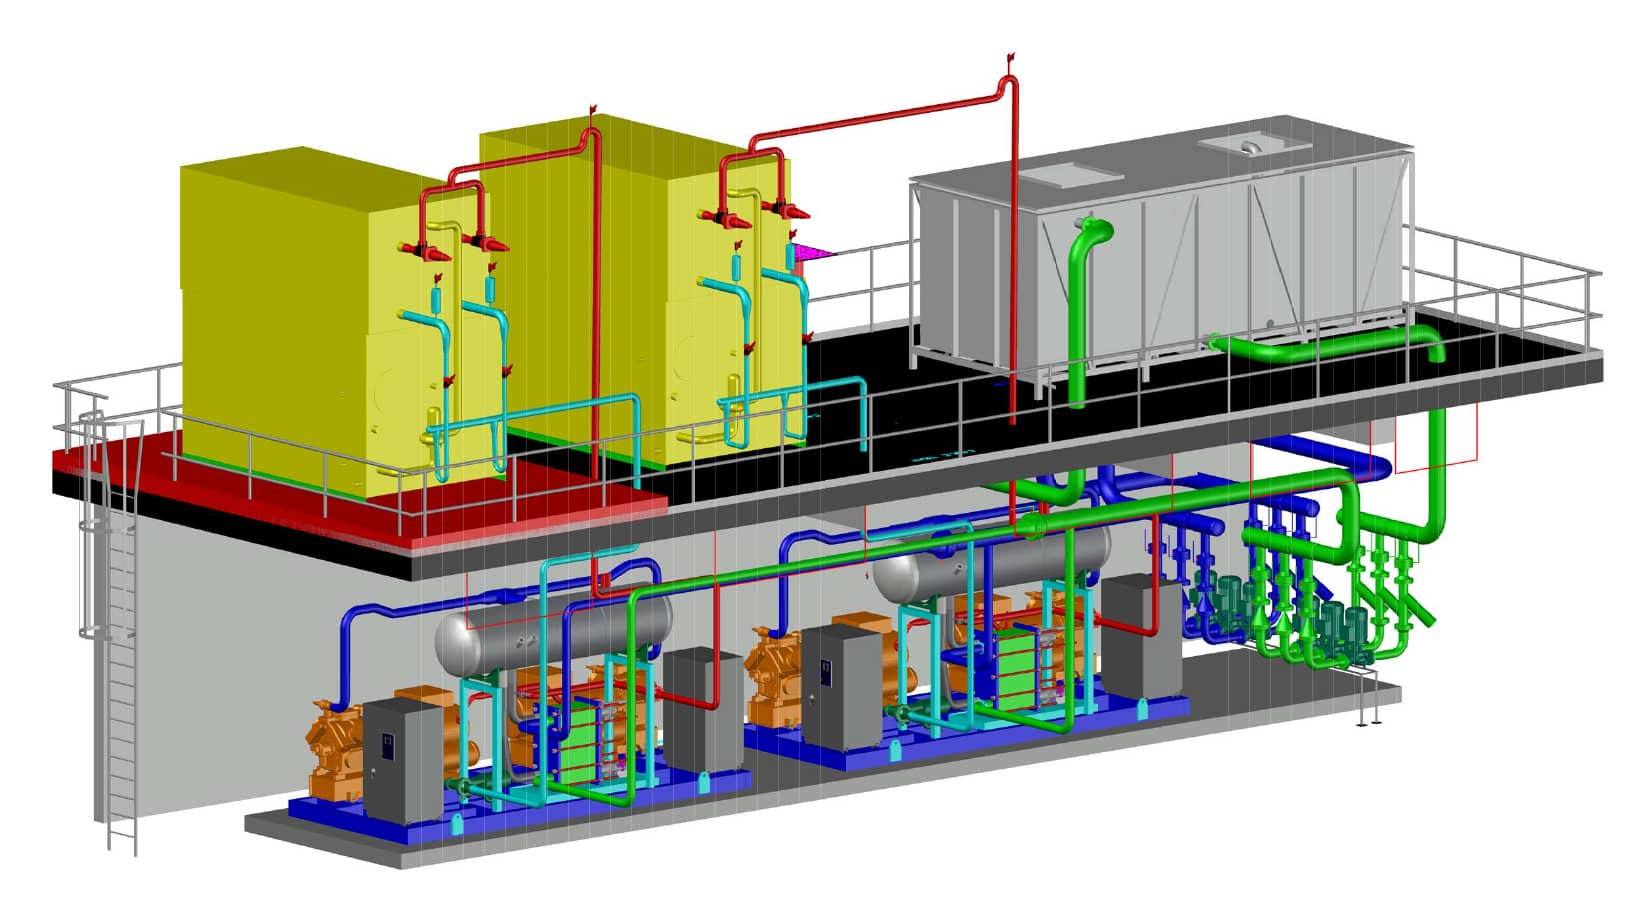 Ammonia Cooling Systems -
Farjallah Holding S.A.L